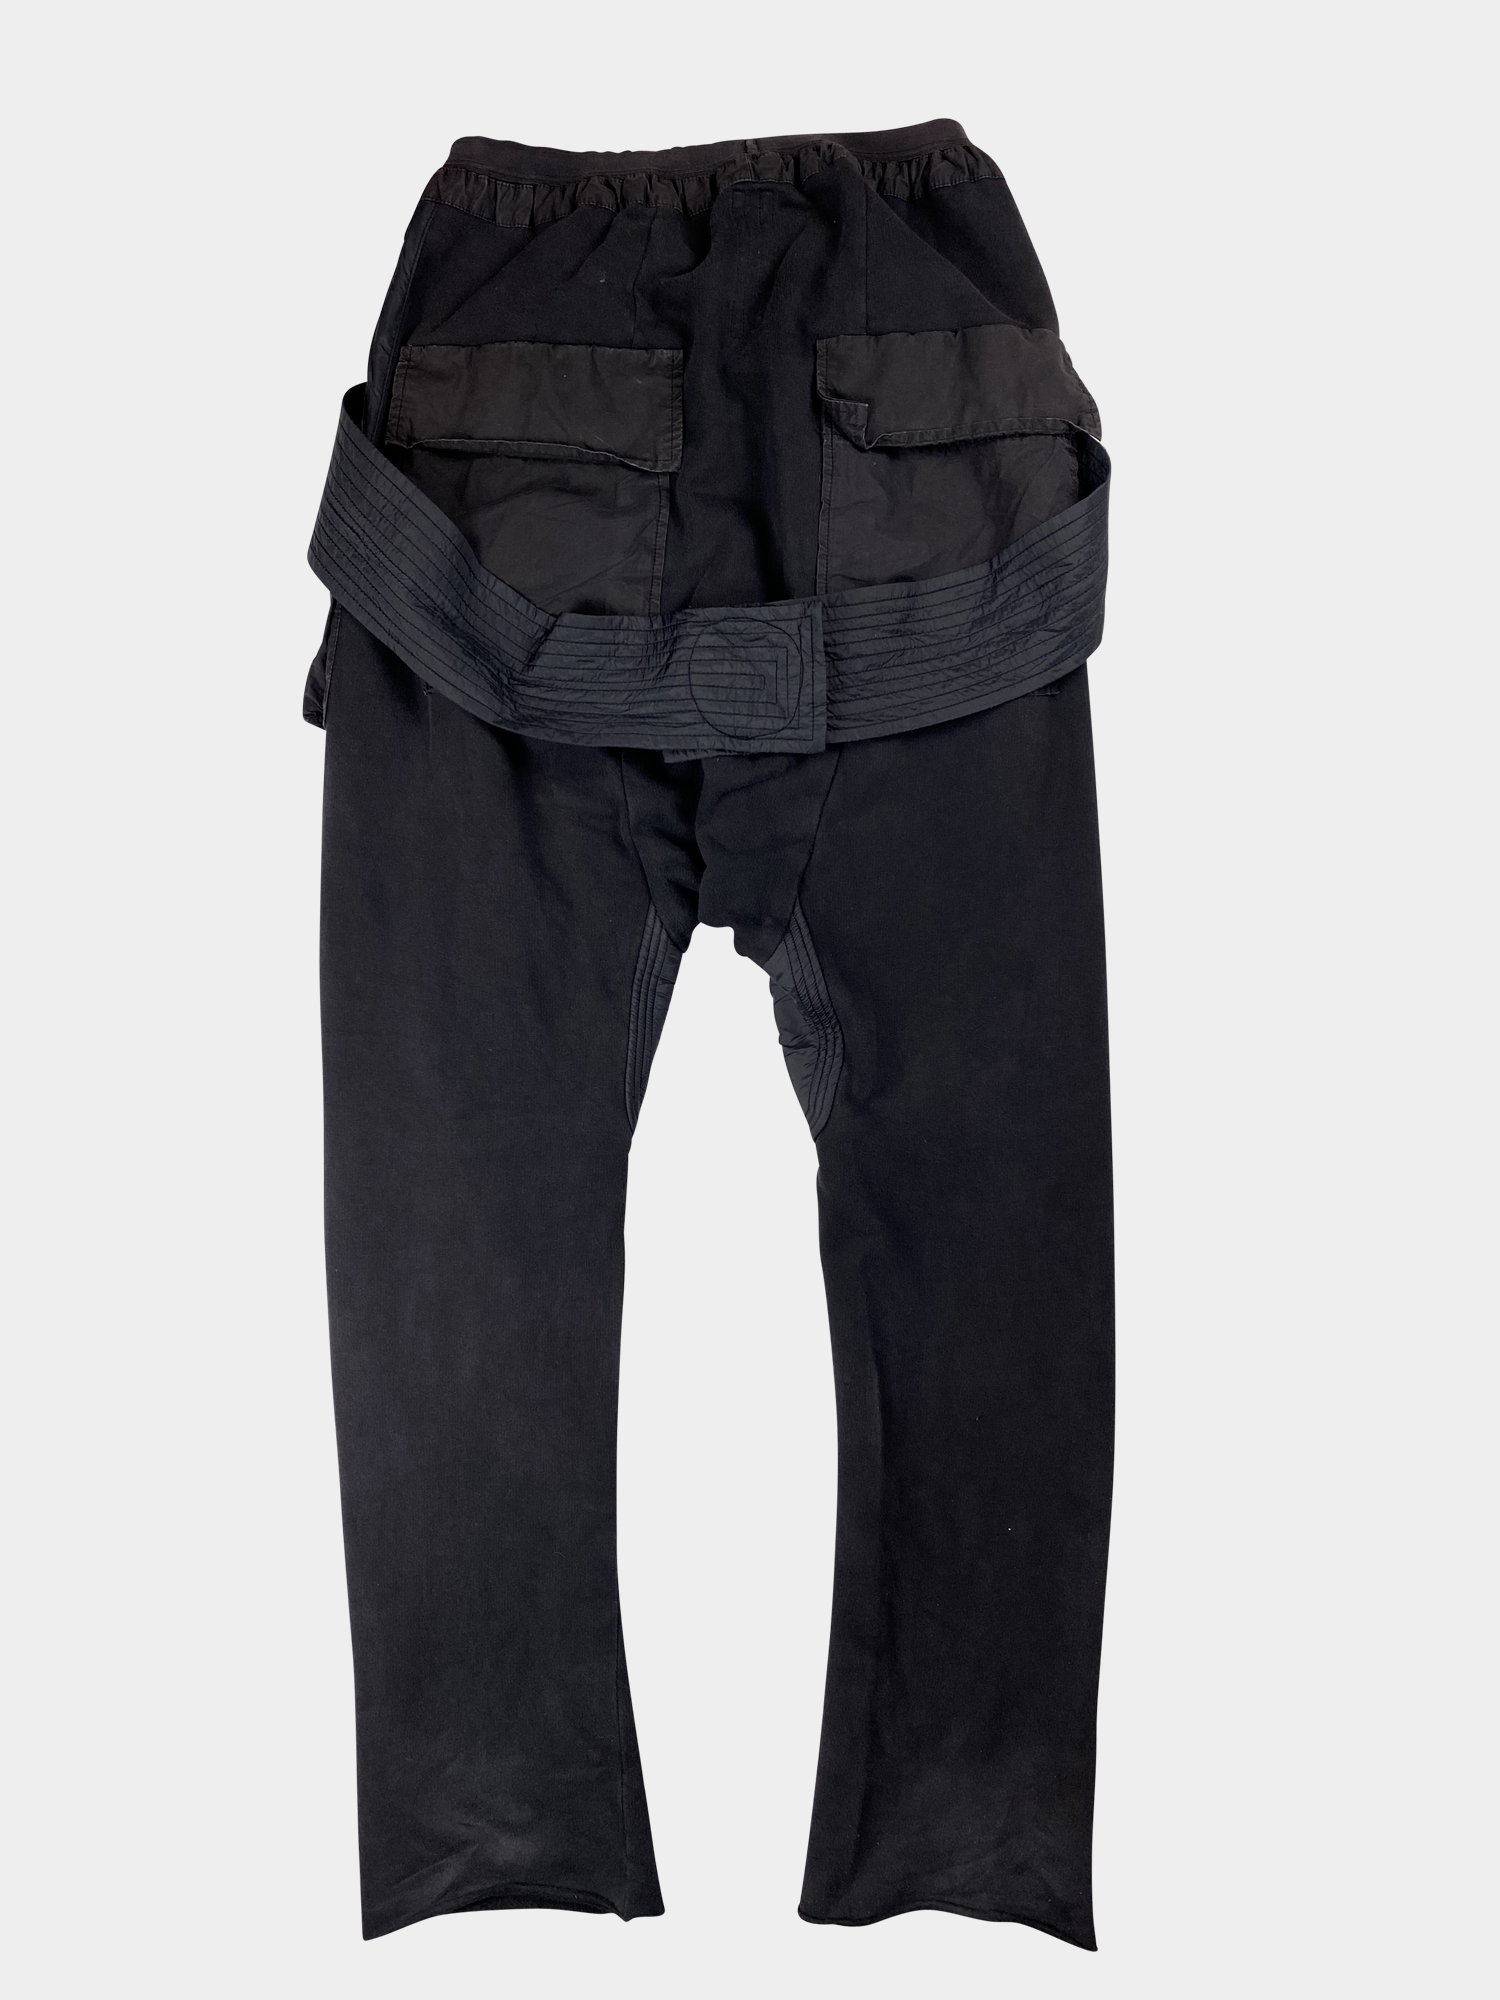 RICK OWENS Creatch Cargo Pants - ARCHIVED